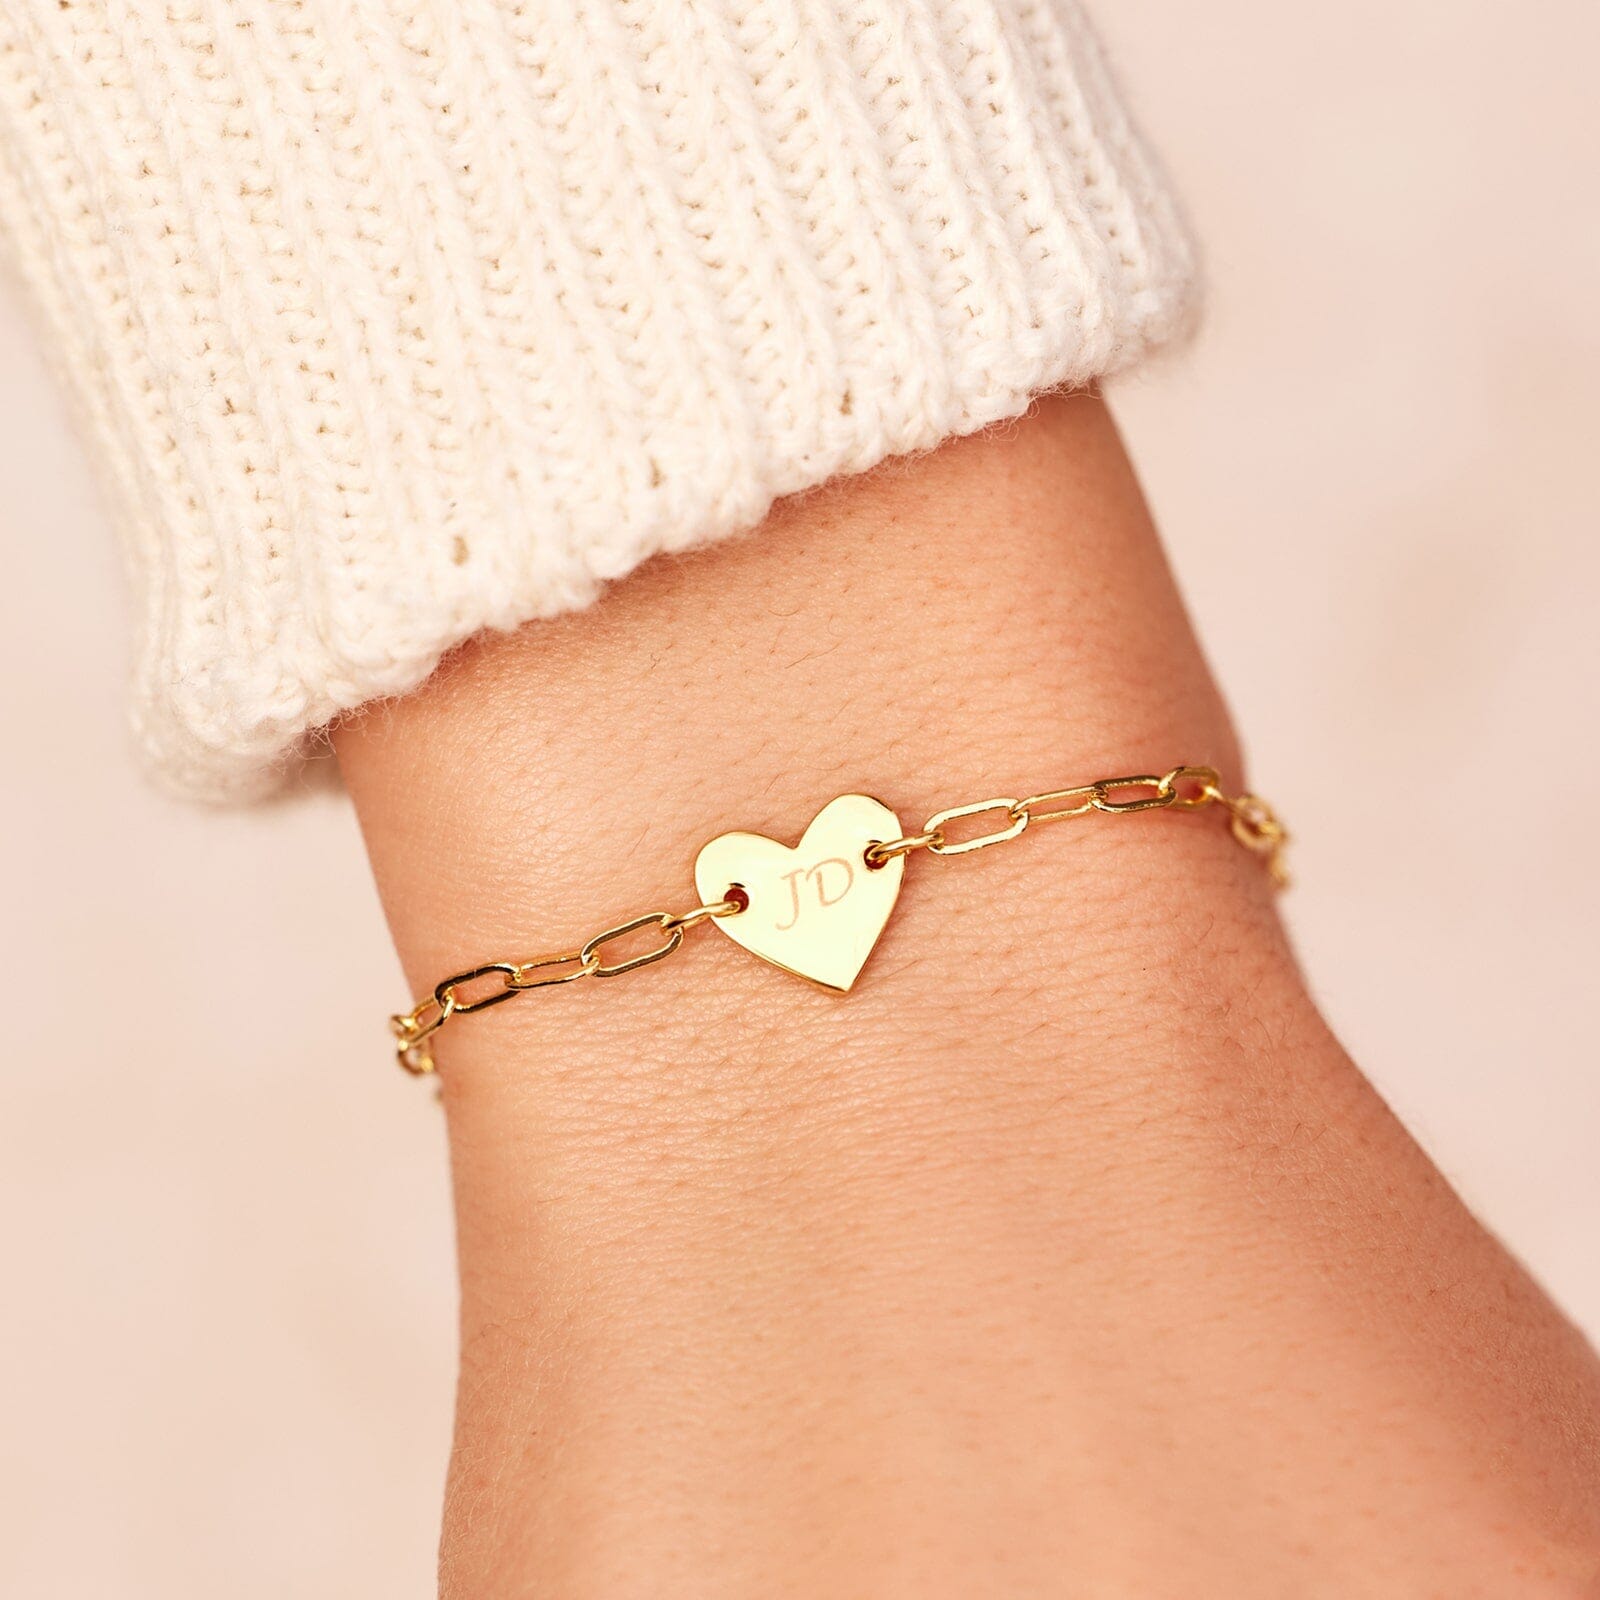 Return to Tiffany™ Heart Tag Bracelet in Sterling Silver with a Diamond,  Medium | Tiffany & Co.